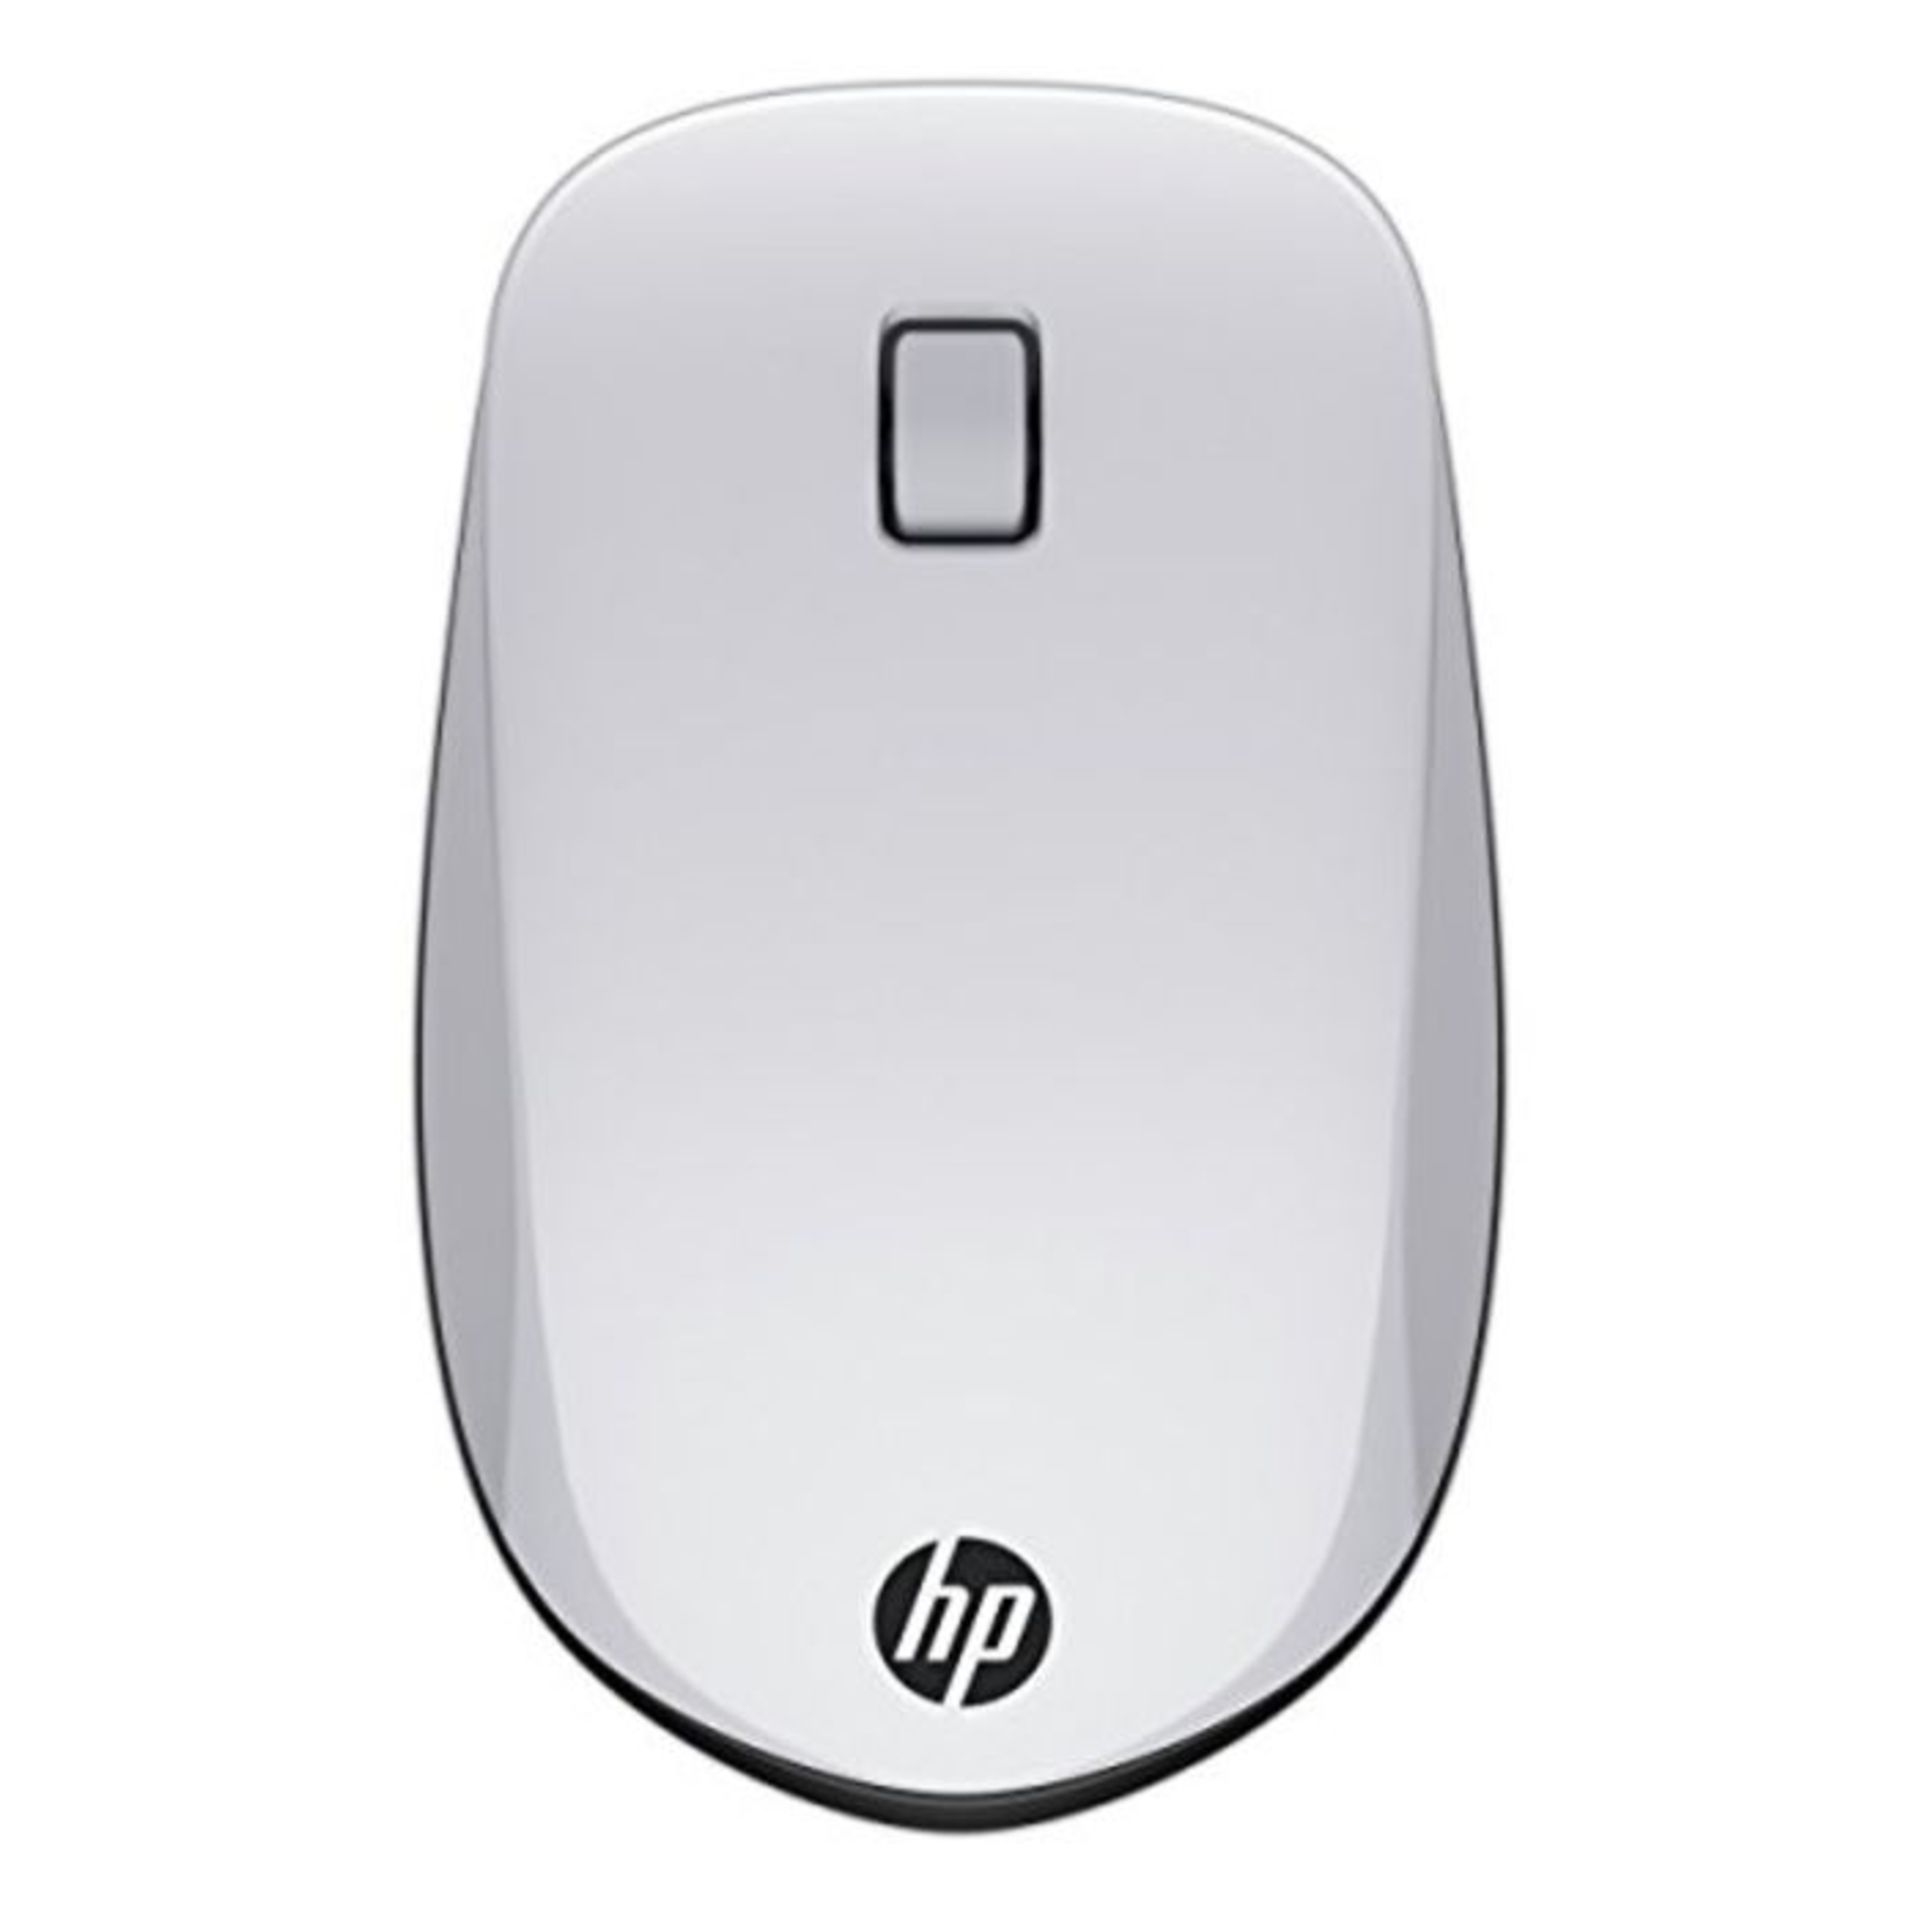 HP Z5000 Silver Slim Bluetooth Wireless Mouse with LED Battery Indicator Light, Ambide